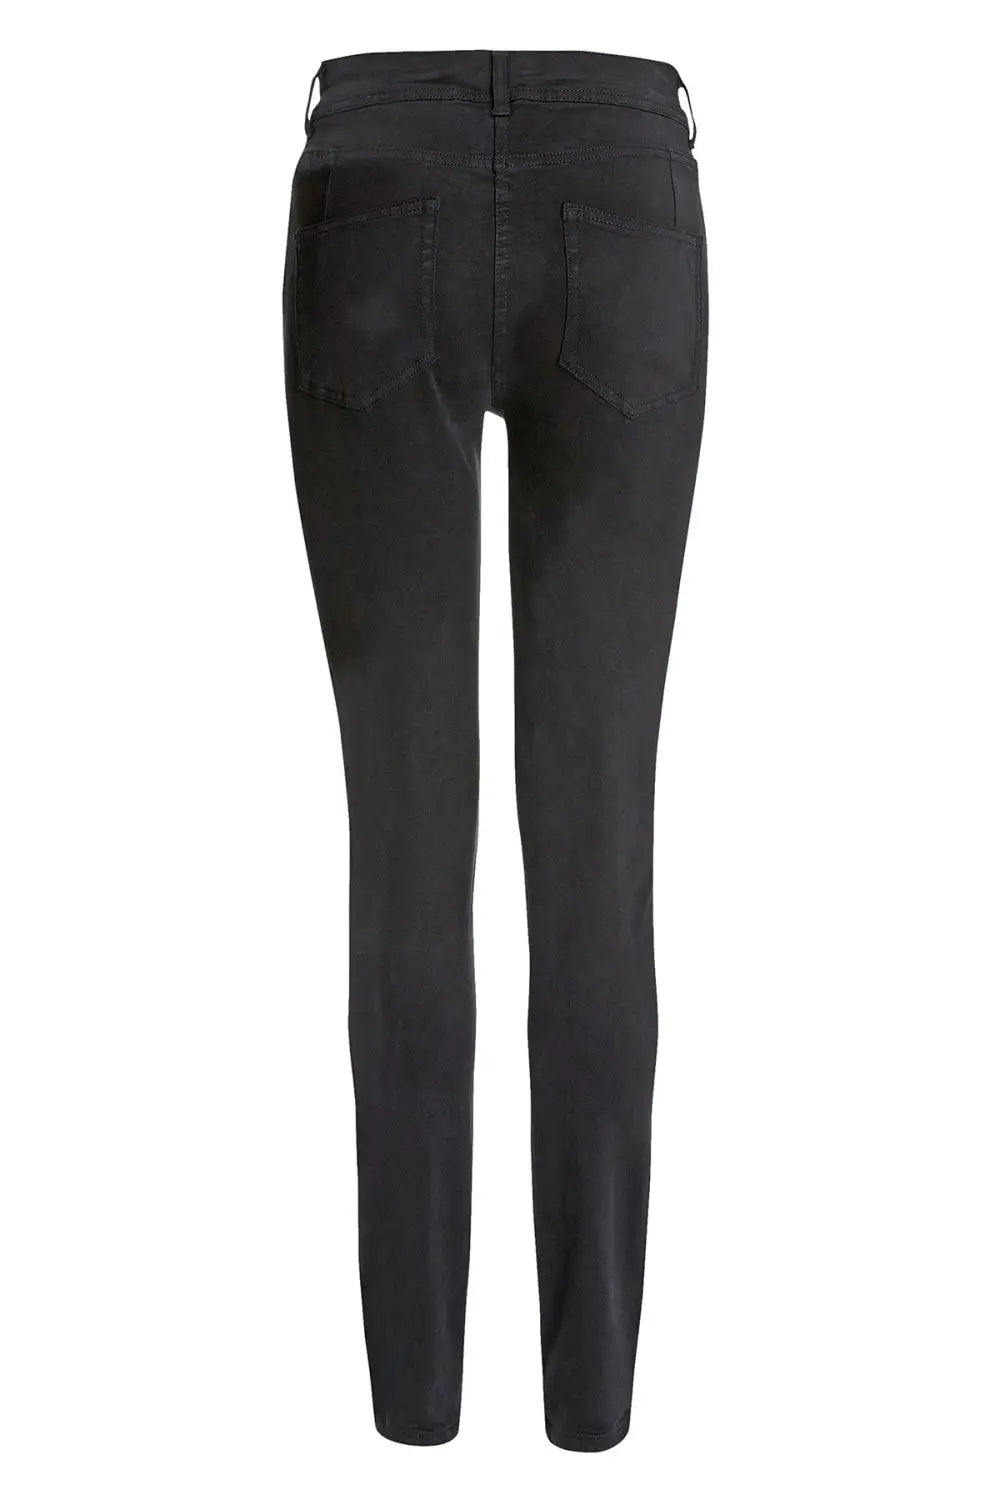 Secret Label Soft Touch High Waisted Skinny Jeans